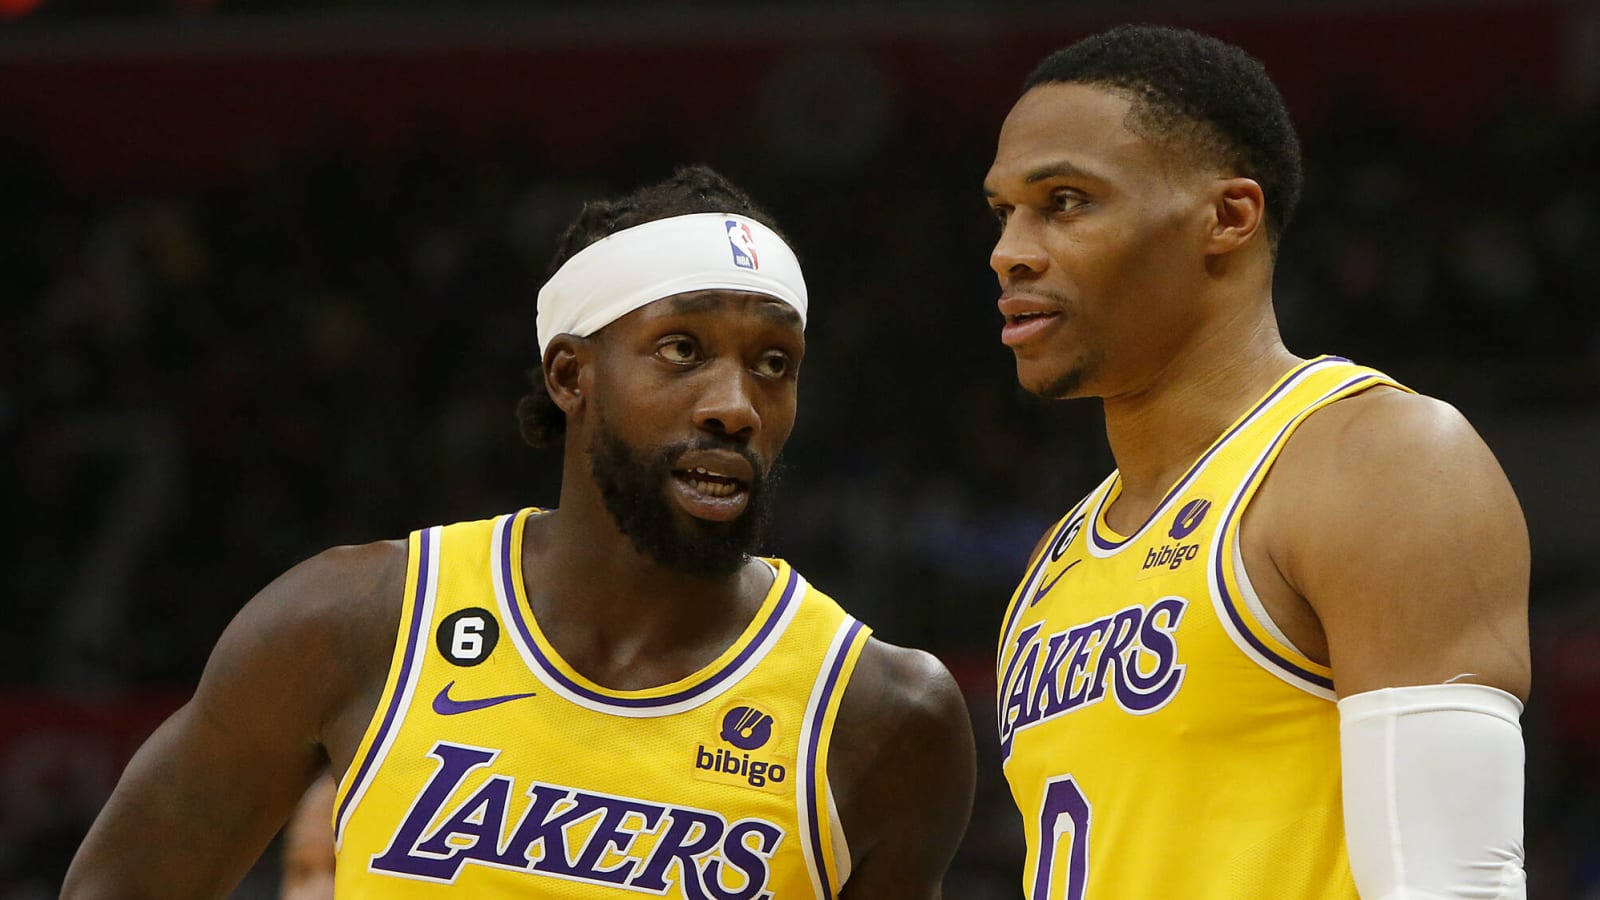 Patrick Beverley Russell Westbrook Commiserate After Trades From Lakers Yardbarker 